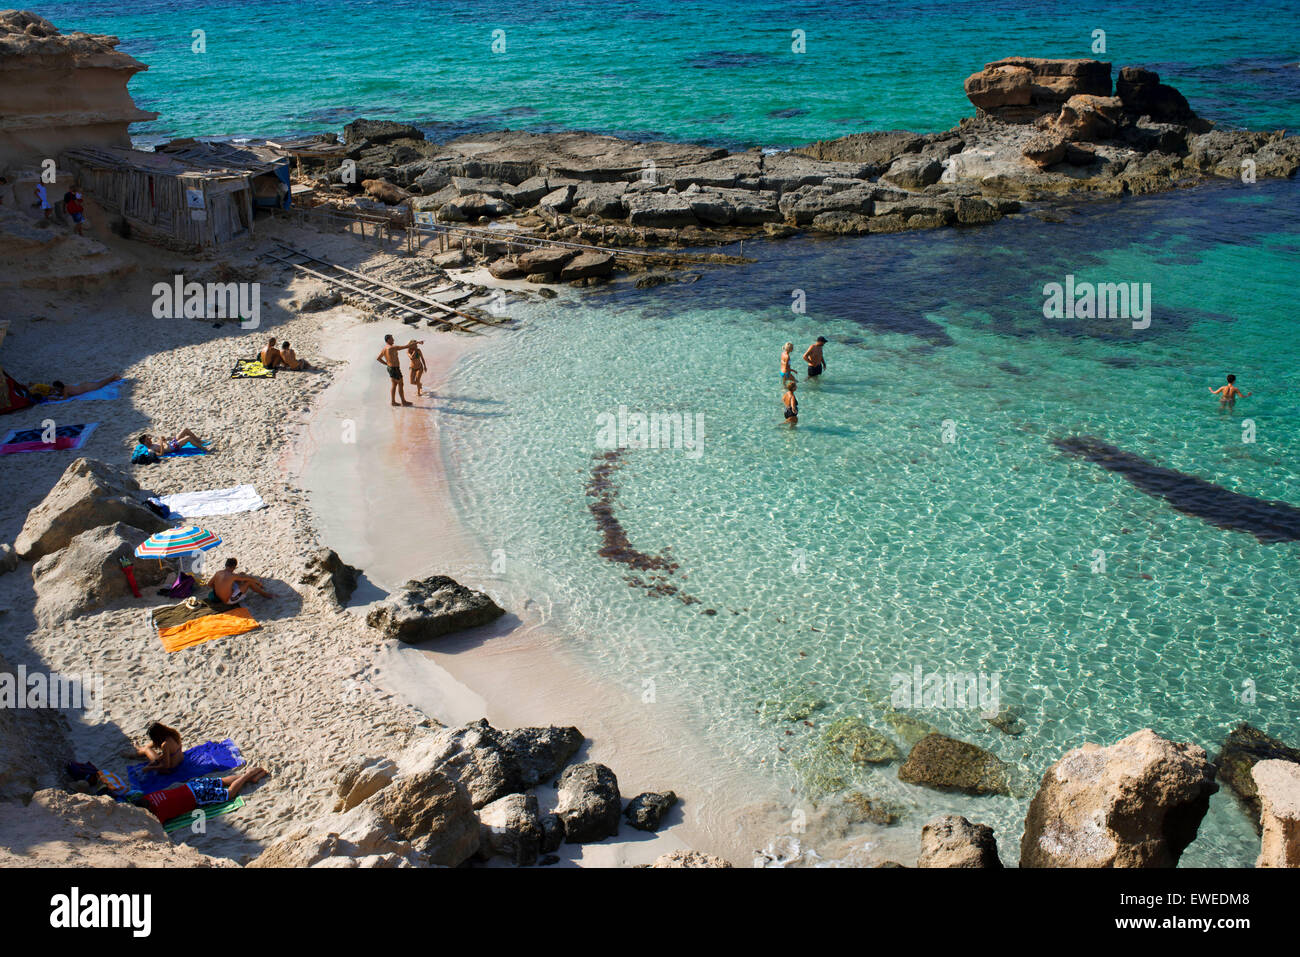 Es caló des Mort, Migjorn beach, Formentera, Balears Islands, Spain. Holiday makers, tourists, Es caló des Mort, beach, Formentera, Pityuses, Balearic Islands, Spain, Europe. Stock Photo